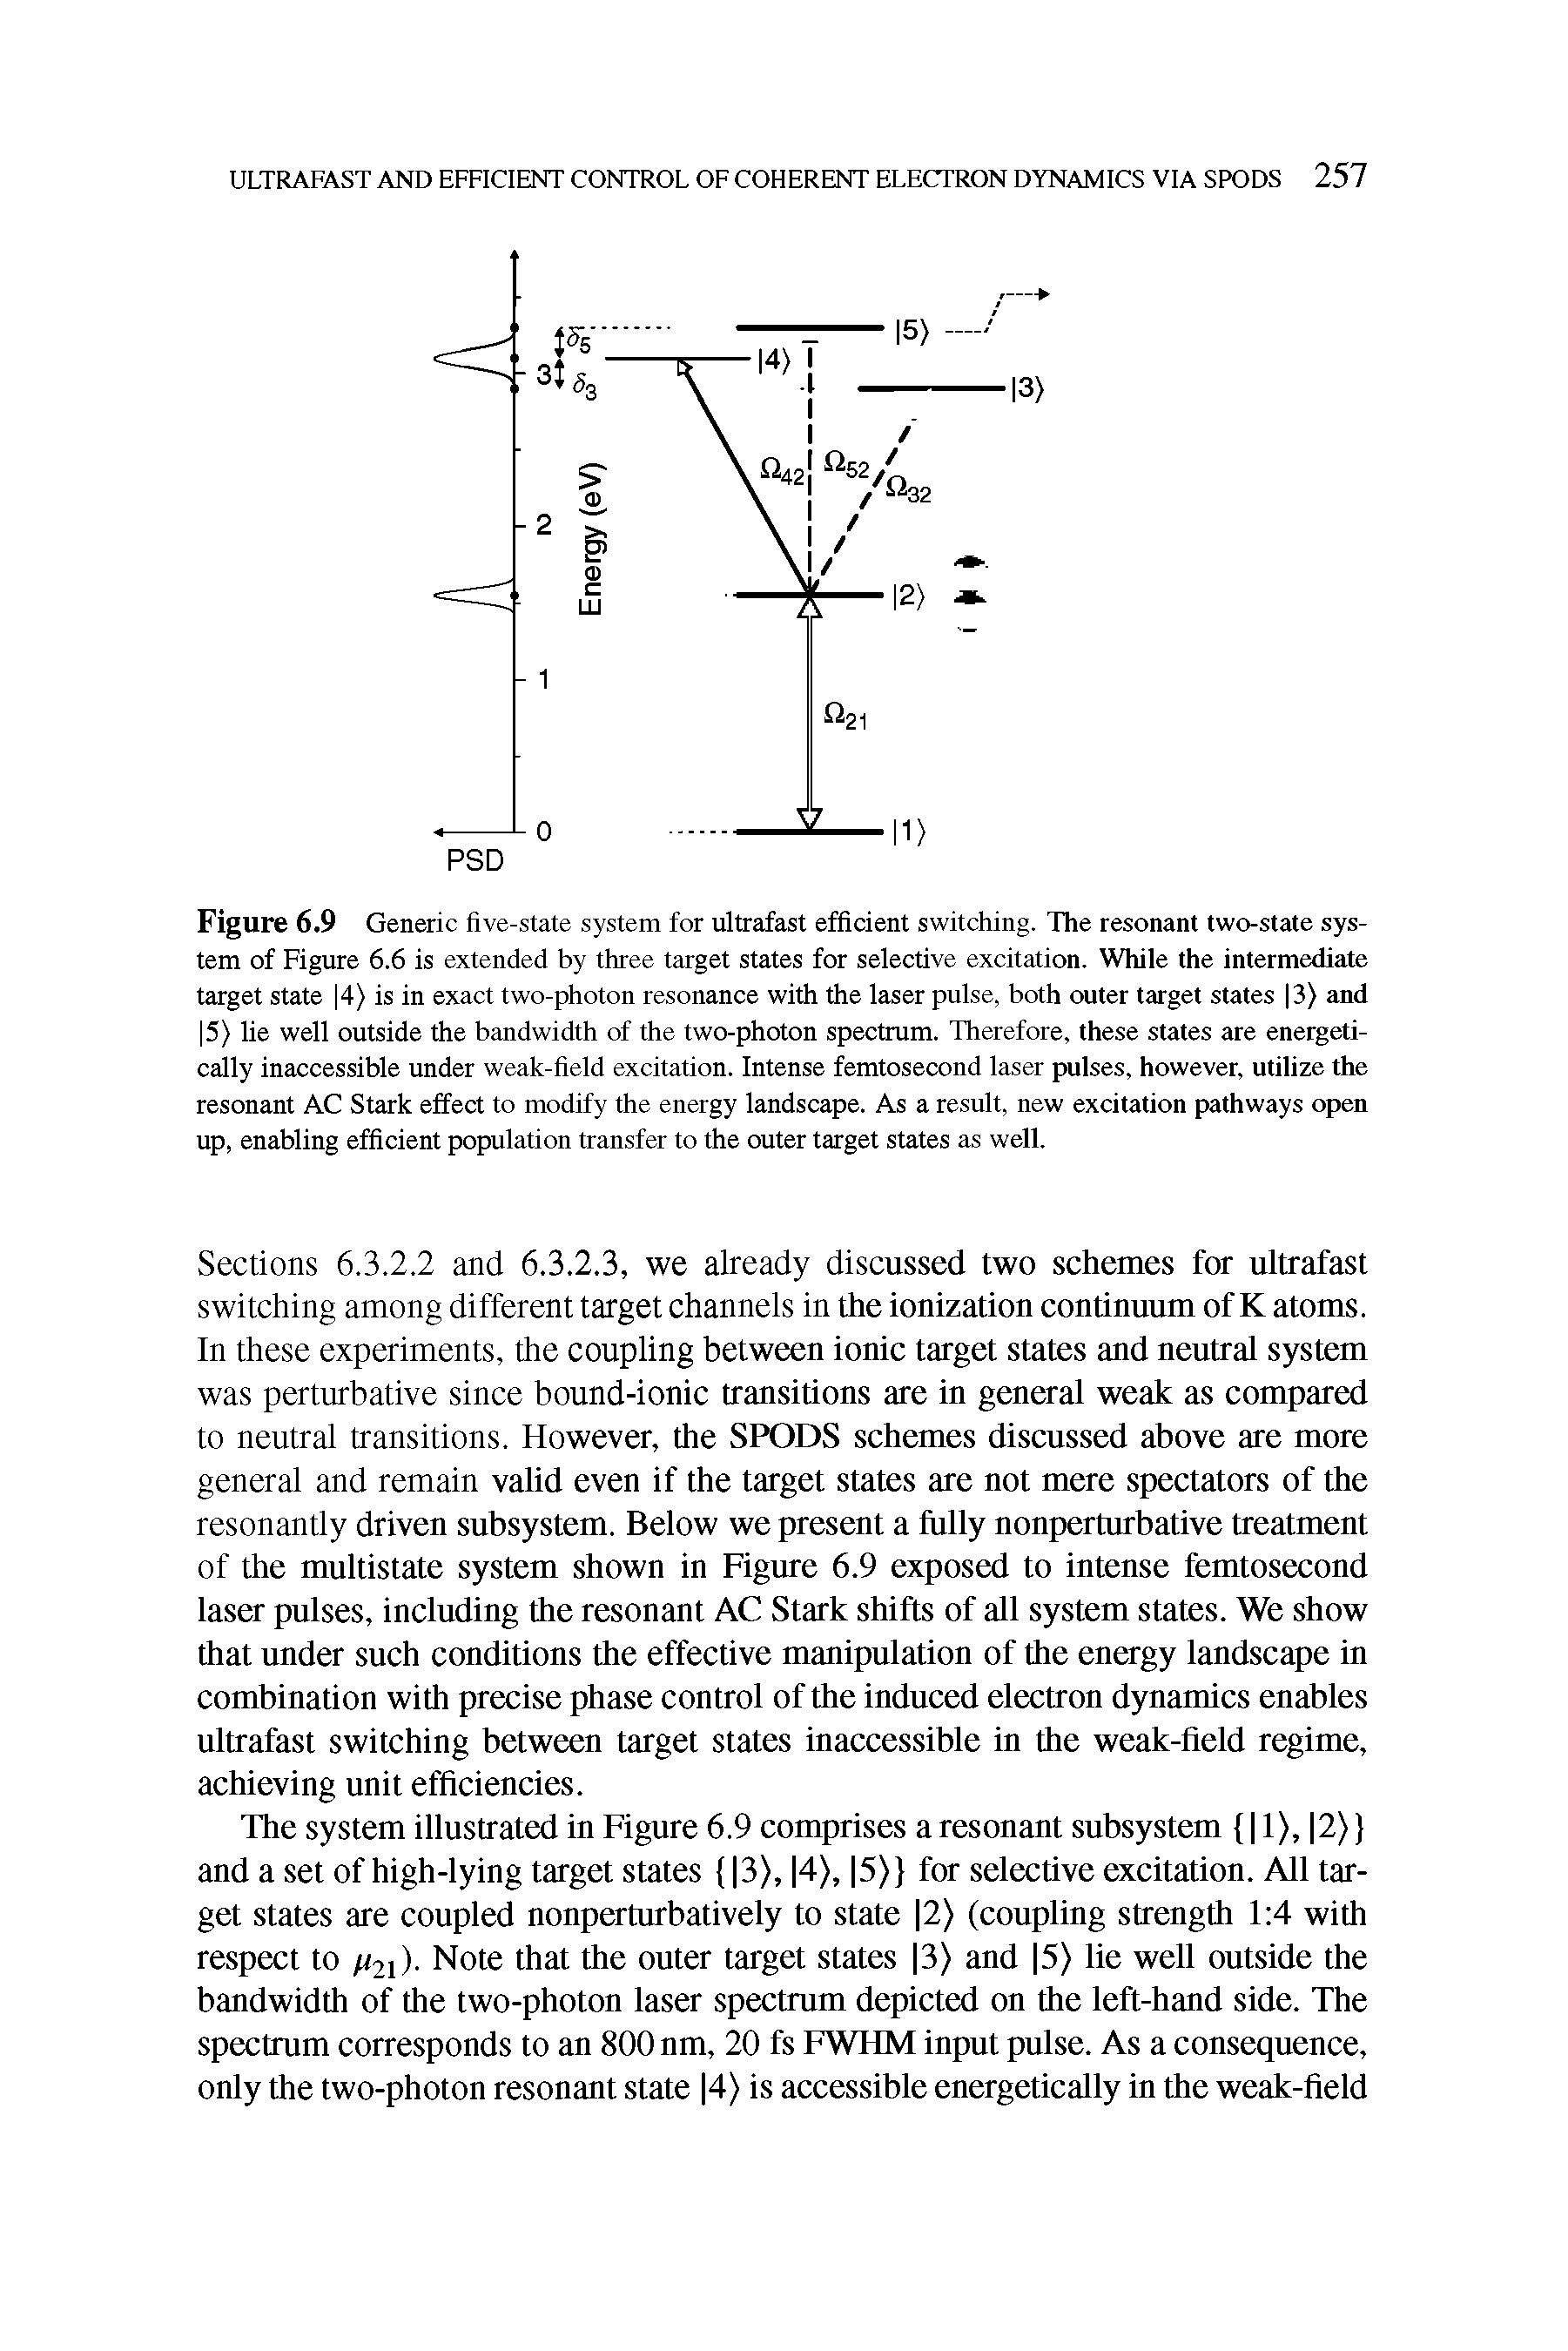 Figure 6.9 Generic five-state system for ultrafast efficient switching. The resonant two-state system of Figure 6.6 is extended by three target states for selective excitation. While the intermediate target state 4) is in exact two-photon resonance with the laser pulse, both outer target states 3) and 5) lie well outside the bandwidth of the two-photon spectrum. Therefore, these states are energetically inaccessible under weak-field excitation. Intense femtosecond laser pulses, however, utilize the resonant AC Stark effect to modify the energy landscape. As a result, new excitation pathways open up, enabling efficient population transfer to the outer target states as well.